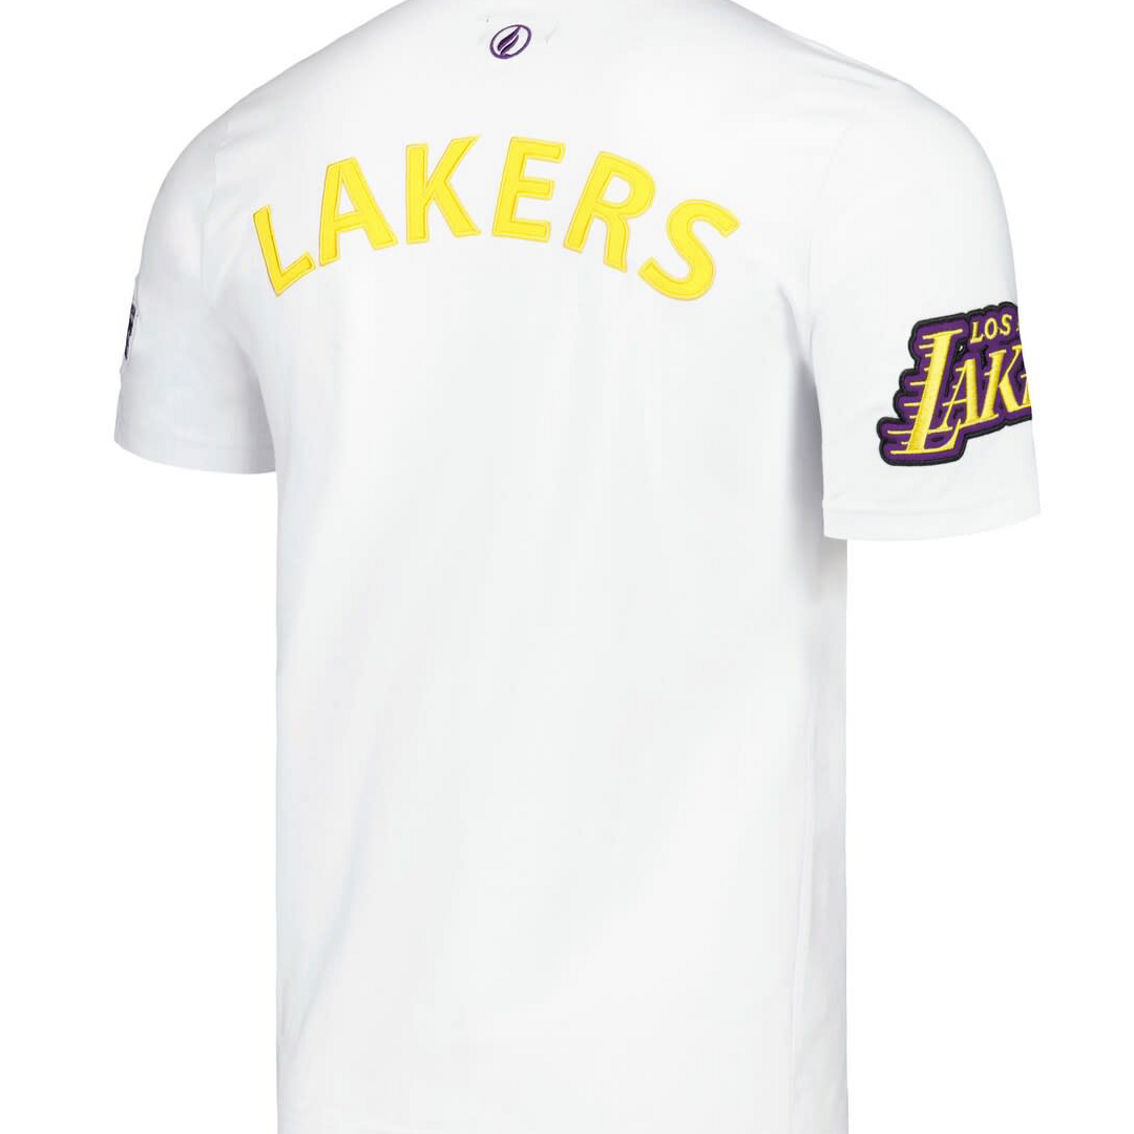 FISLL Unisex White Los Angeles Lakers Heritage Crest T-Shirt - Image 4 of 4